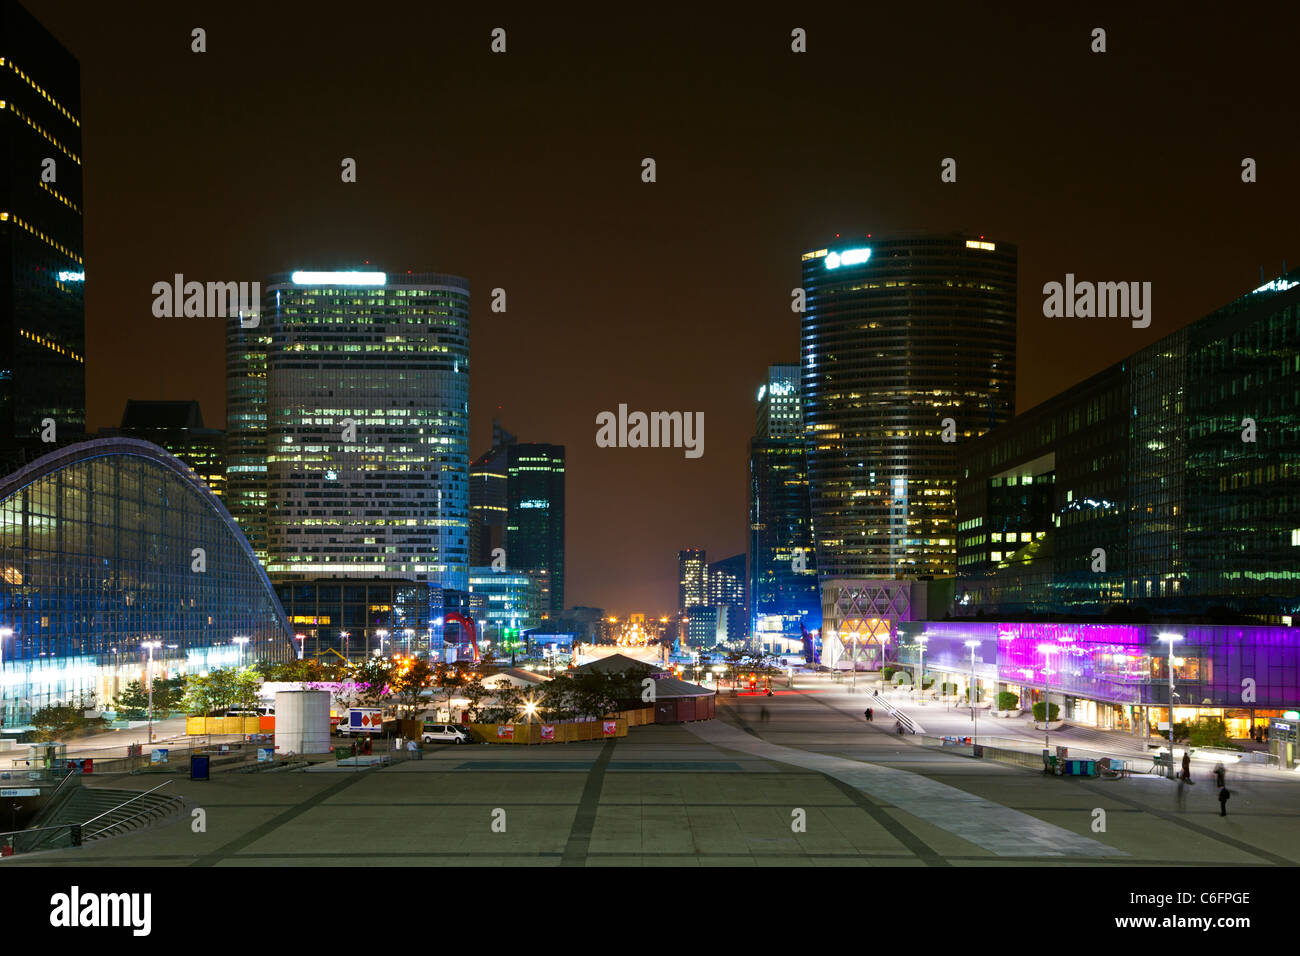 Perspective a night view of financial and business district of Paris - La Défense. Stock Photo